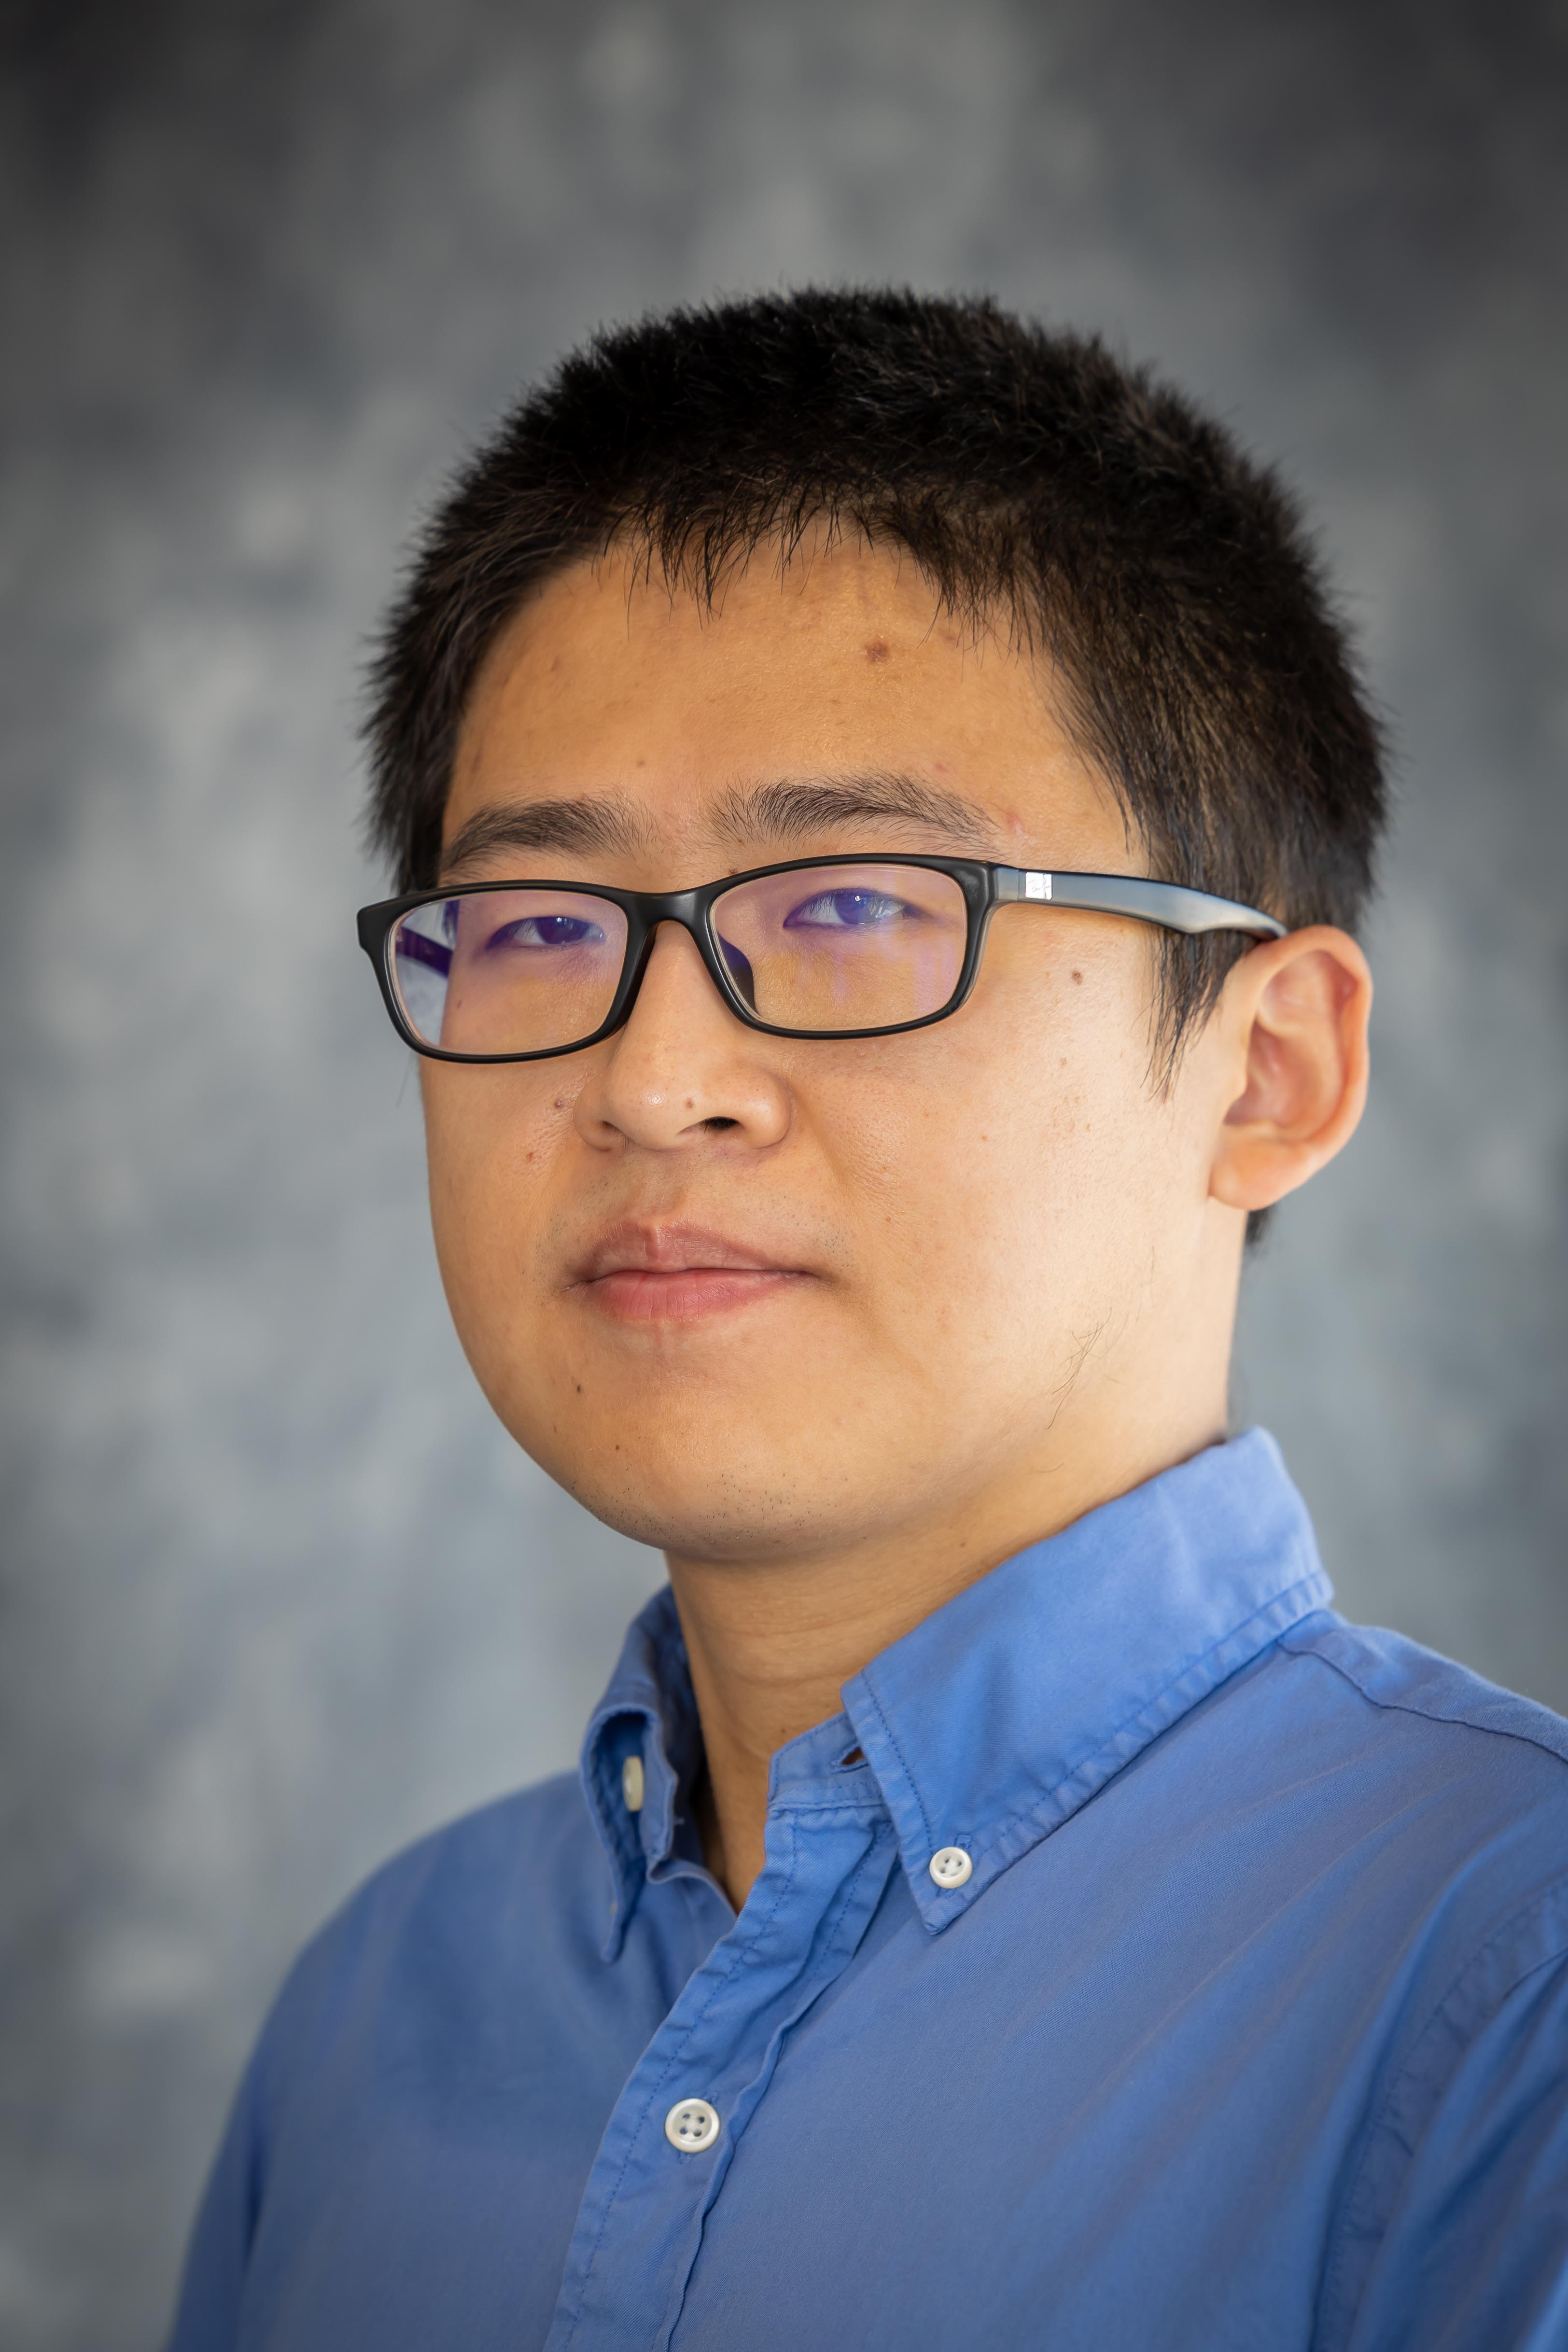 Dr. Tianyun Zhang, an assistant professor in the Department of Computer Science